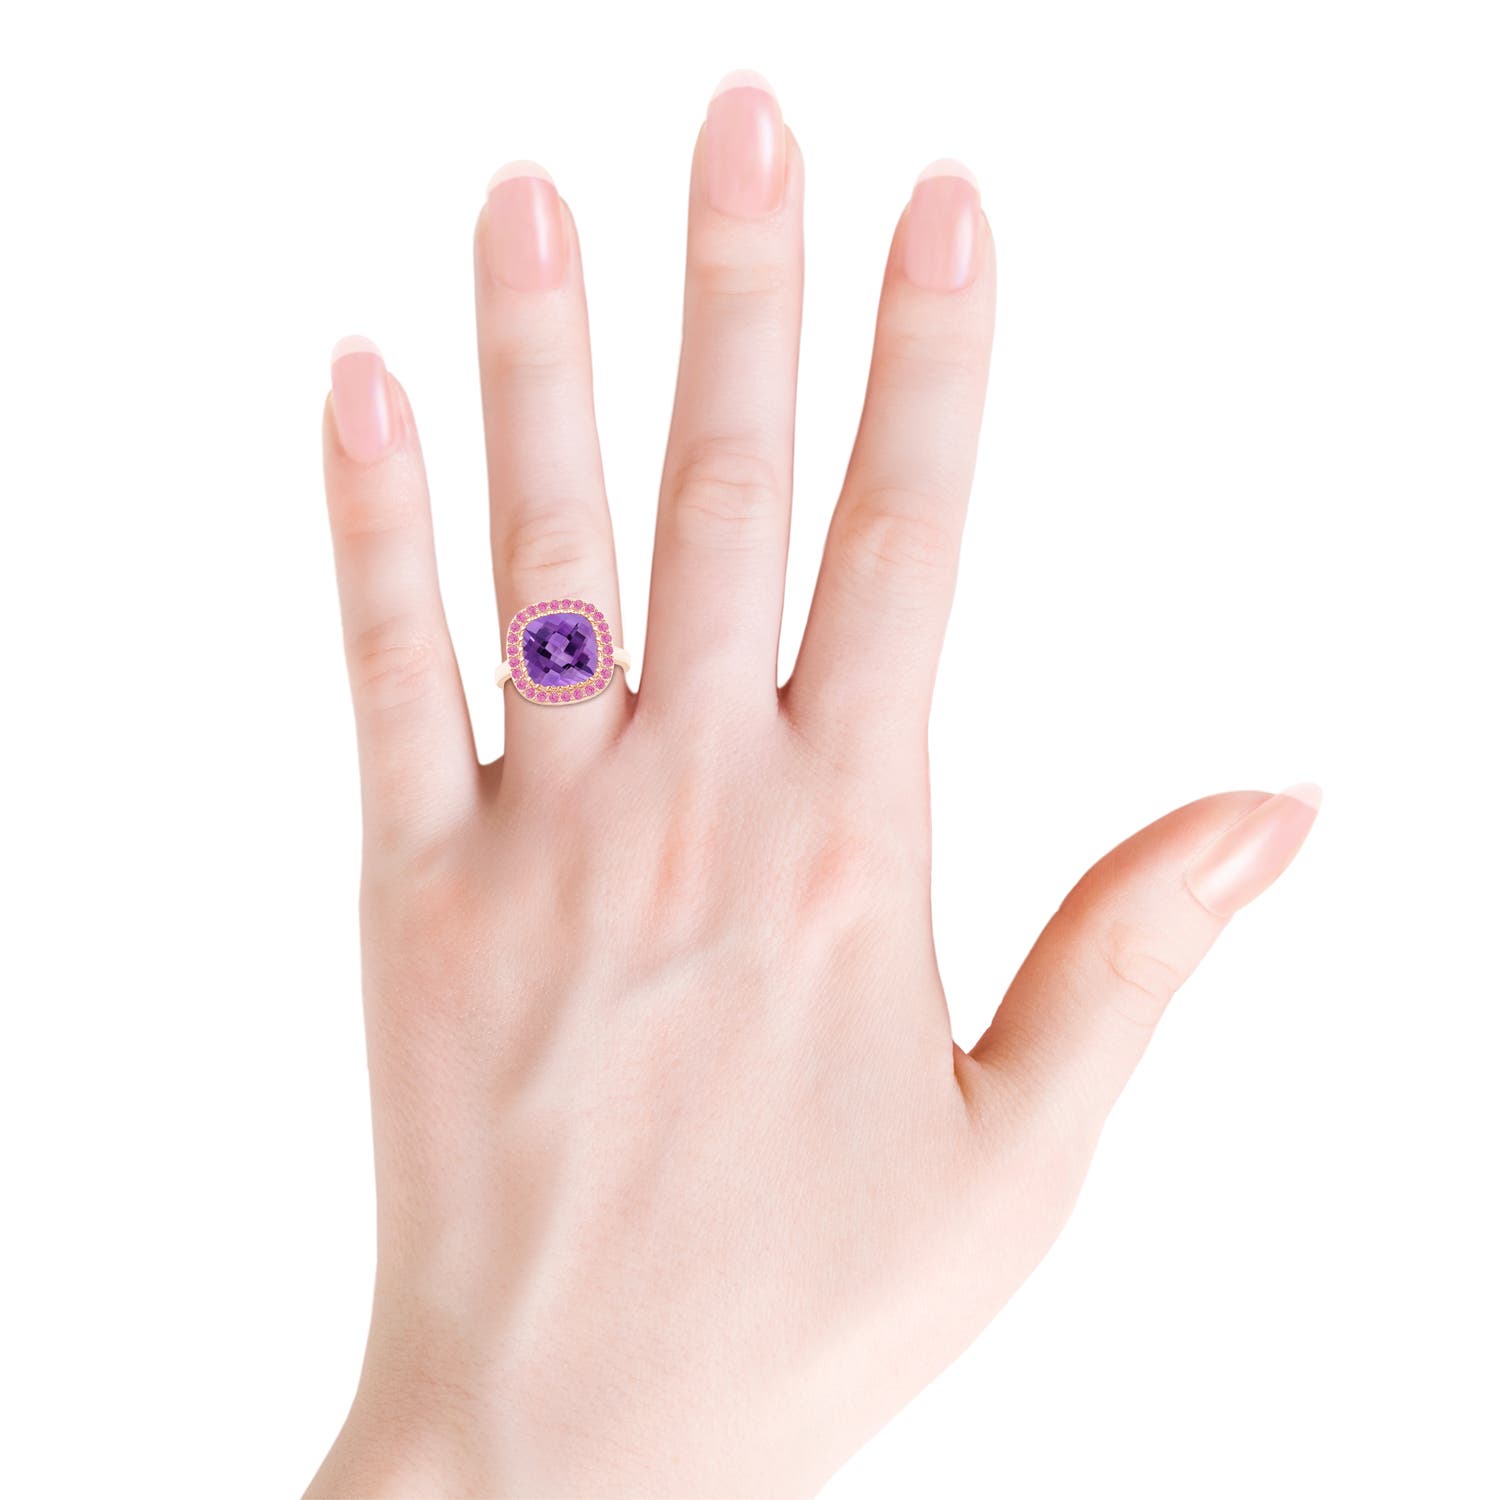 AA - Amethyst / 4.65 CT / 14 KT Rose Gold